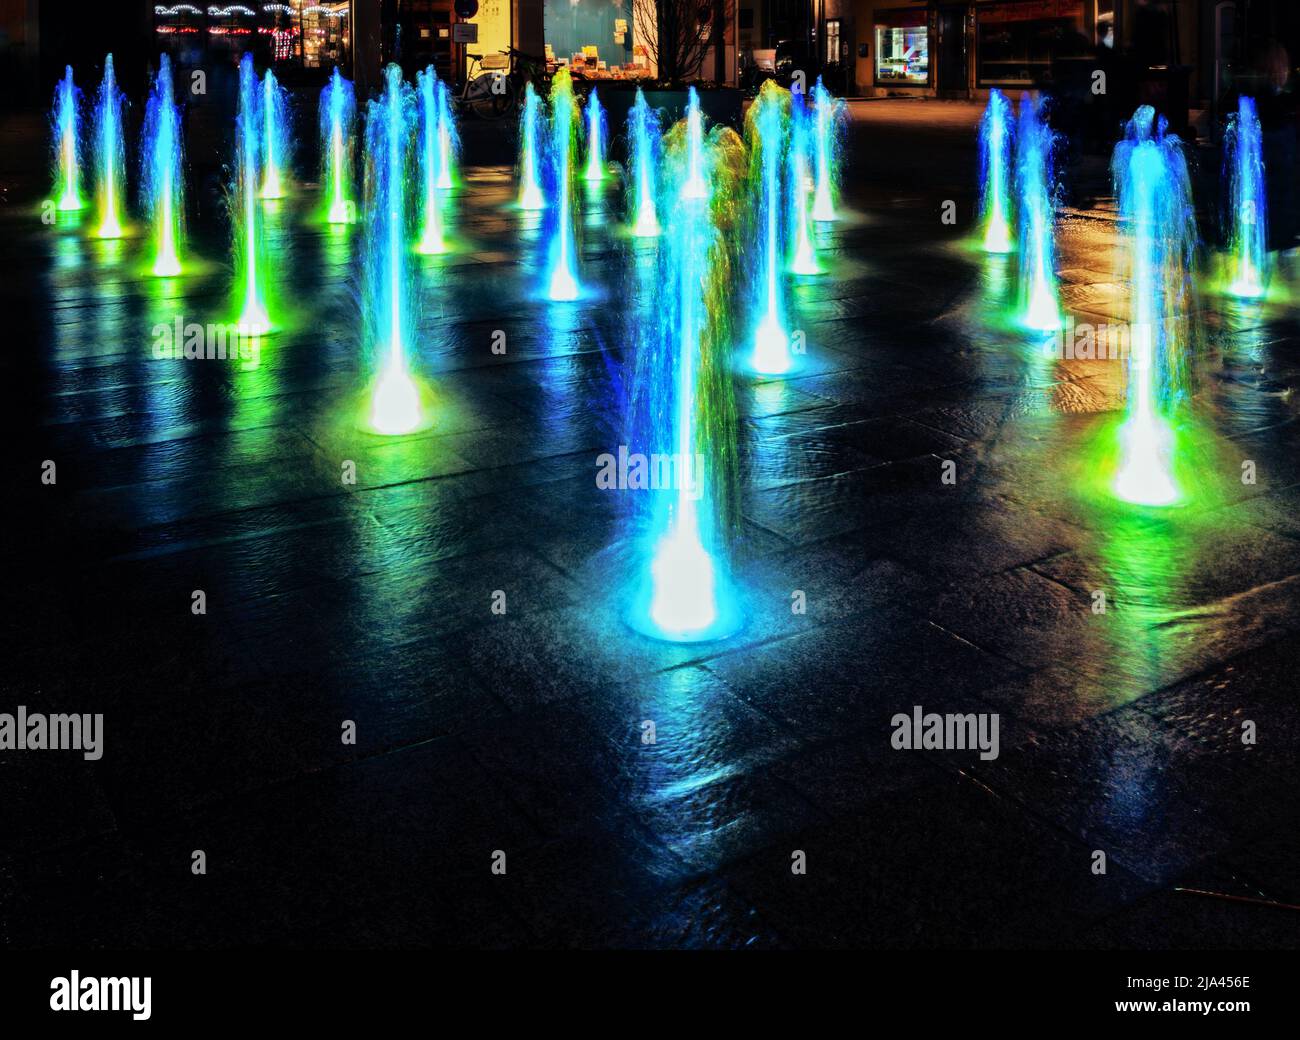 Colourful illuminated waterspout fountain at night Stock Photo